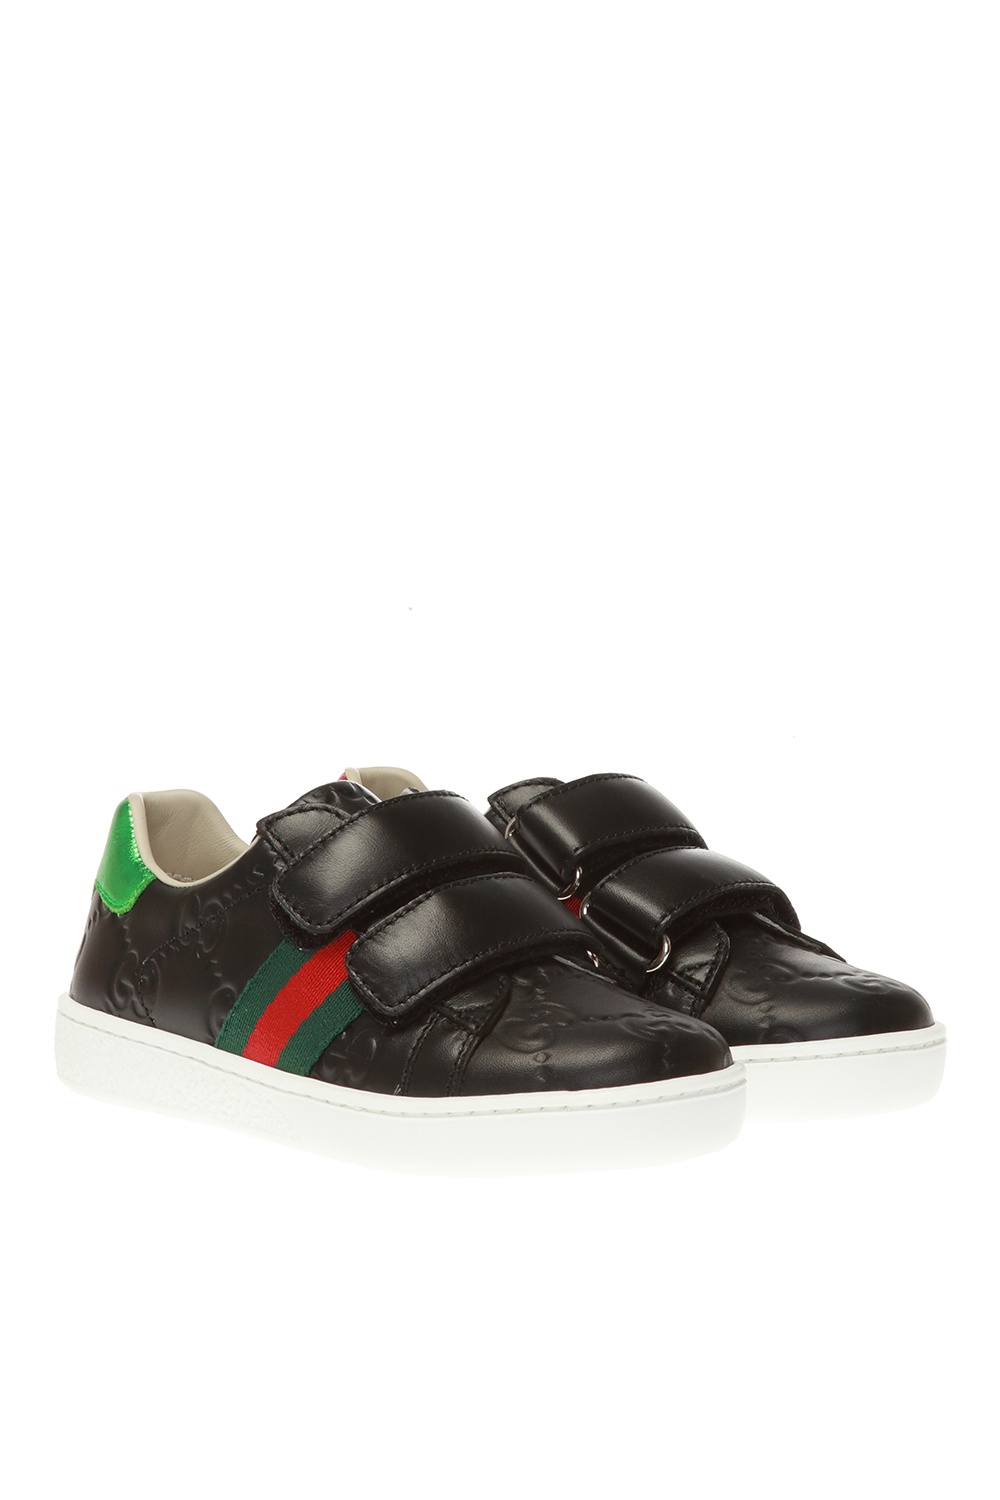 Shop GUCCI Ace Monogram Street Style Logo Sneakers by selectM